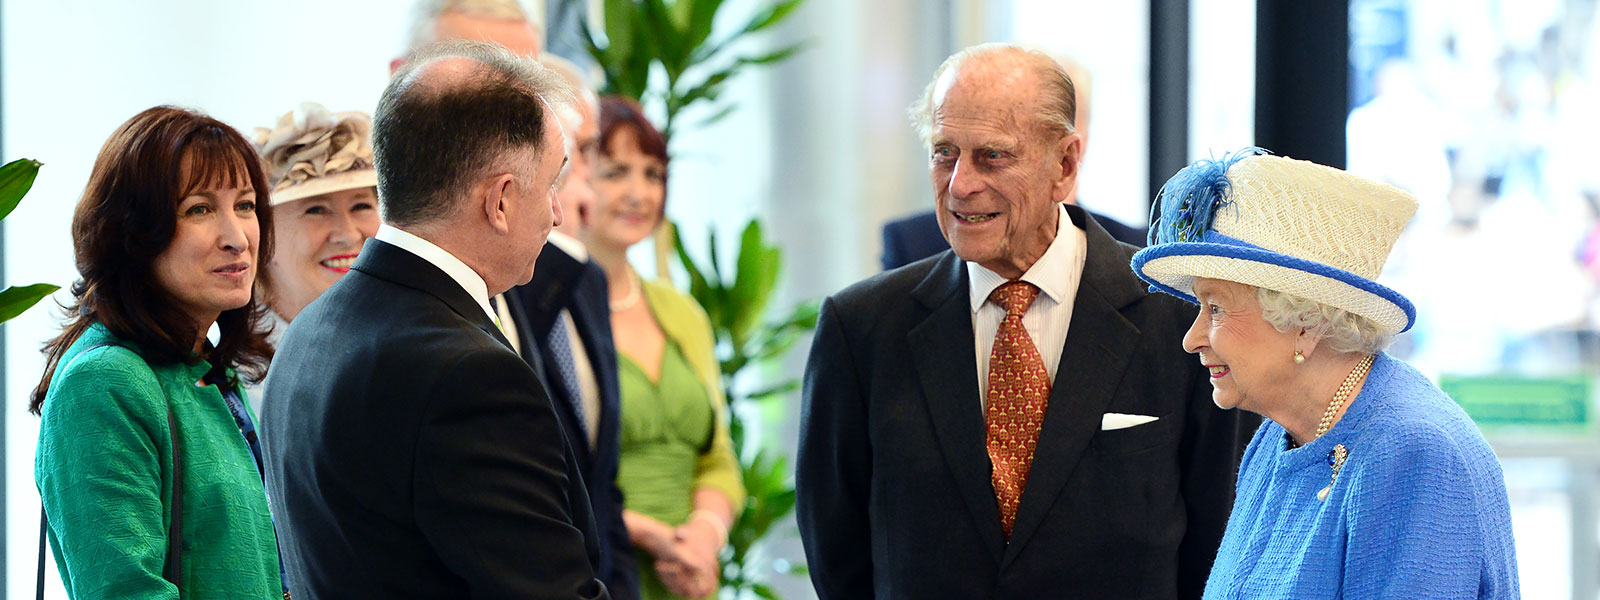 The Principal talks with The Duke of Edinburgh and The Queen at the official opening of the Technology & Innovation Centre.